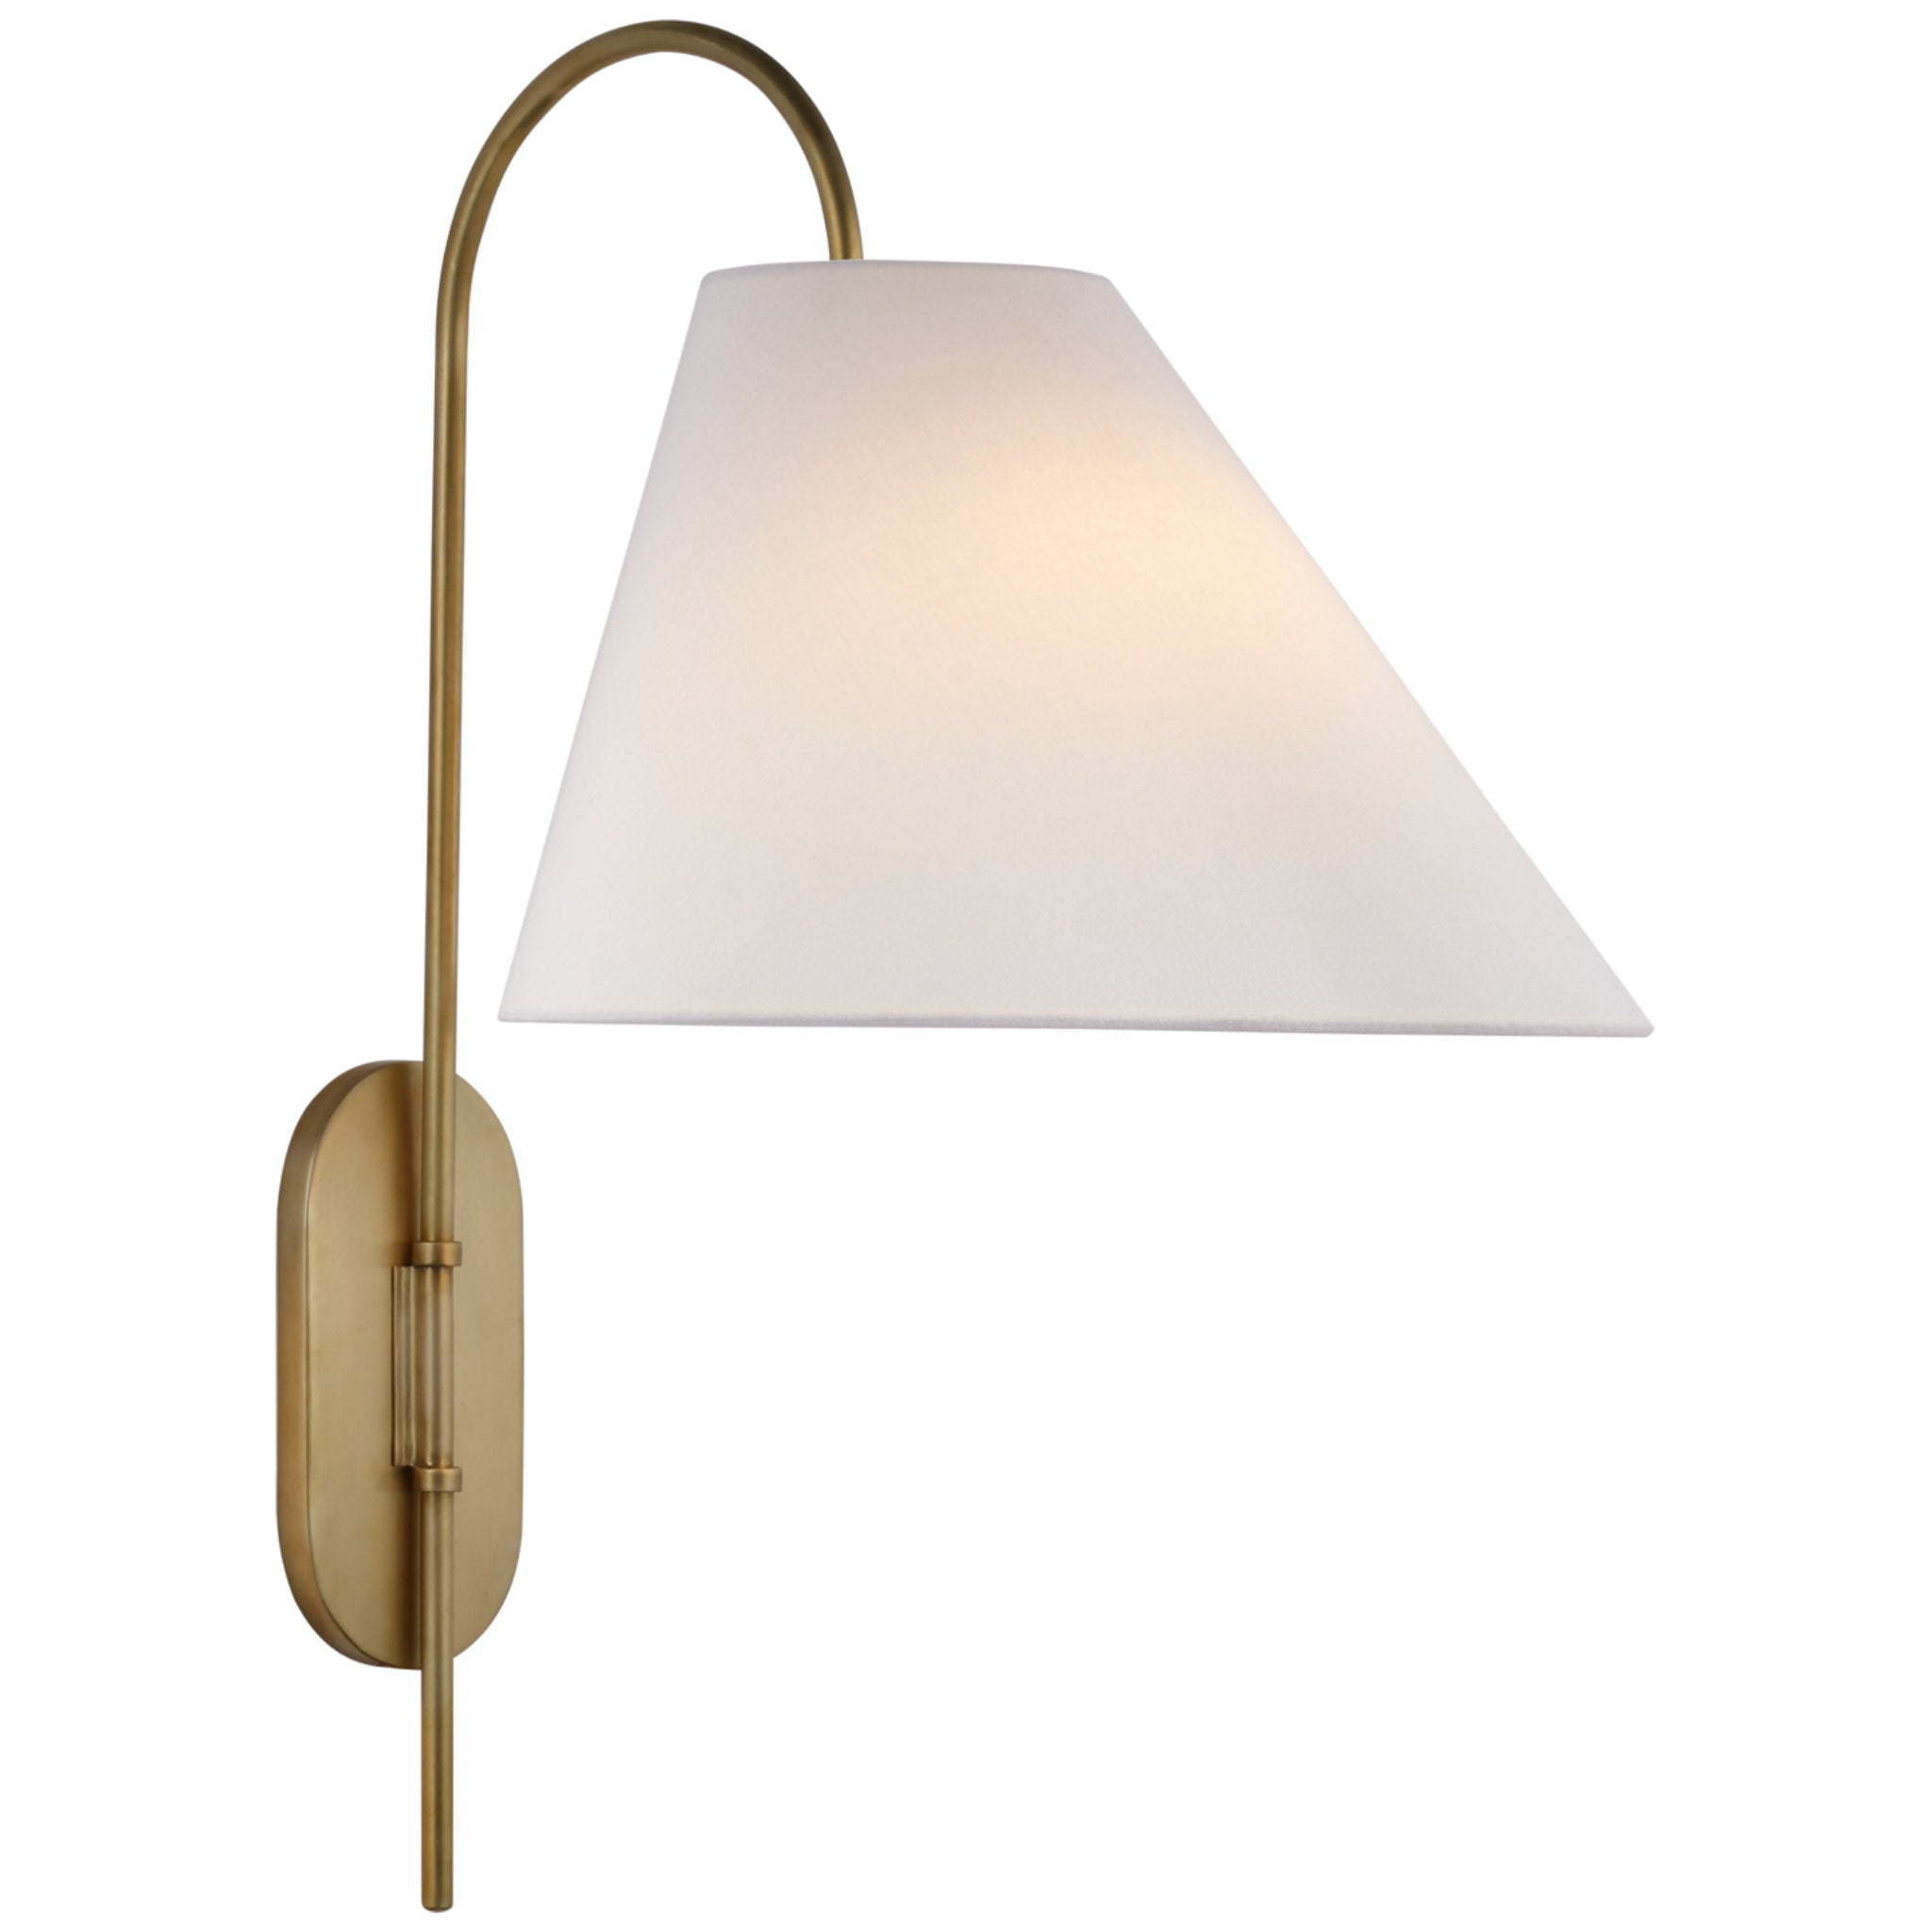 kate spade new york Kinsley Large Articulating Wall Light in Soft Brass with Linen Shade